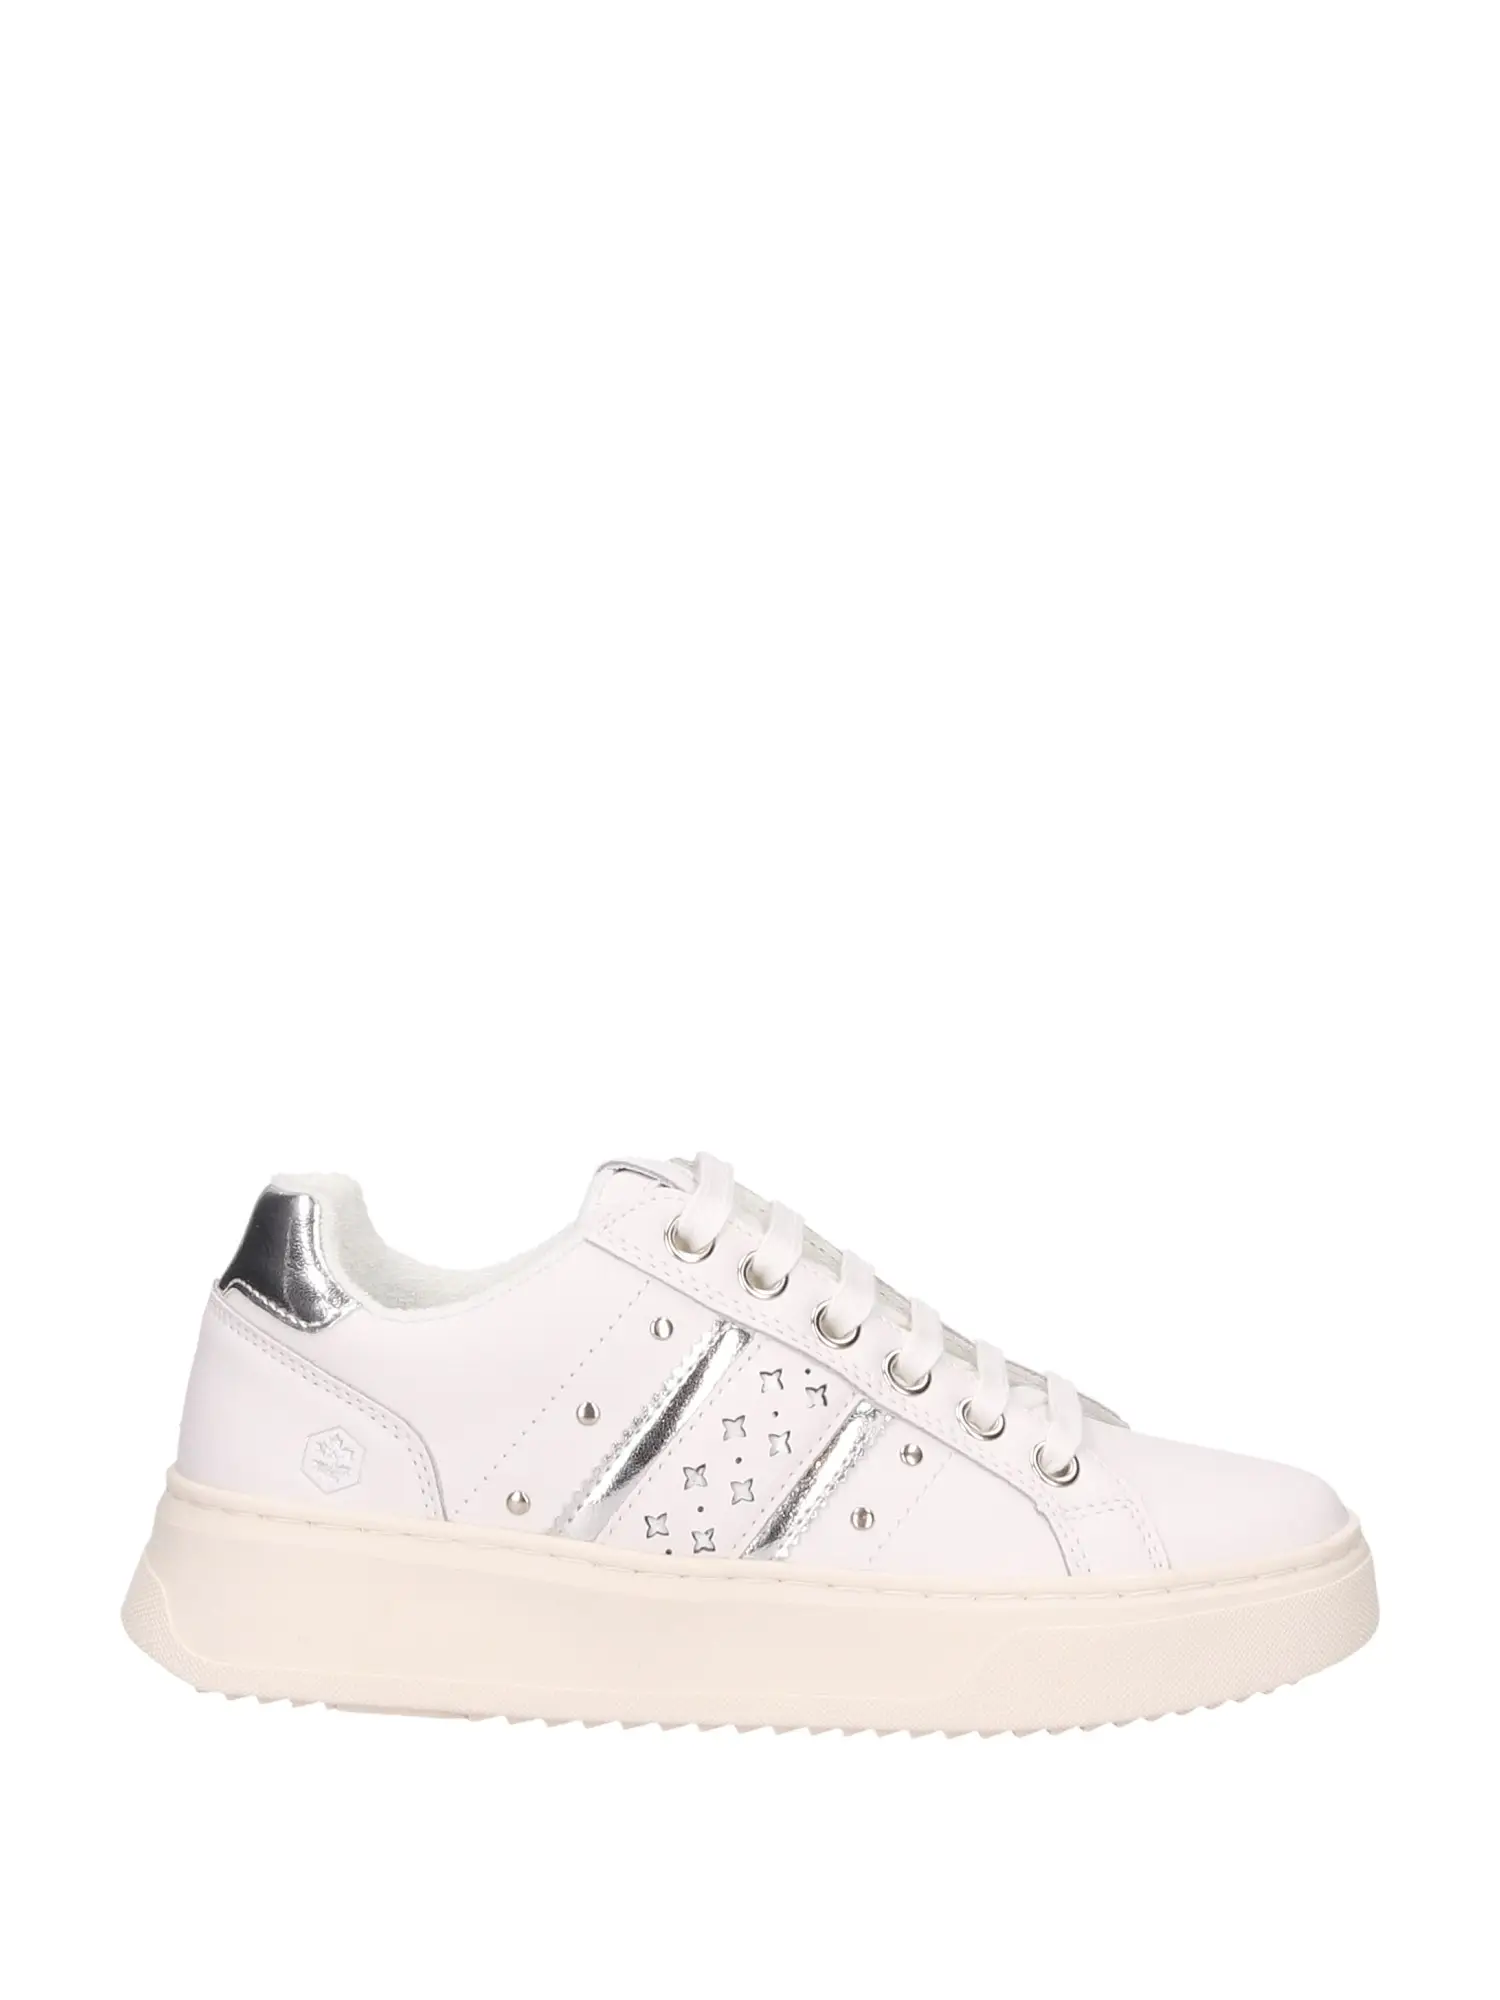 SNEAKERS DONNA - LUMBERJACK - SWH6512-006 Q85 - BIANCO/ARGENTO, 39